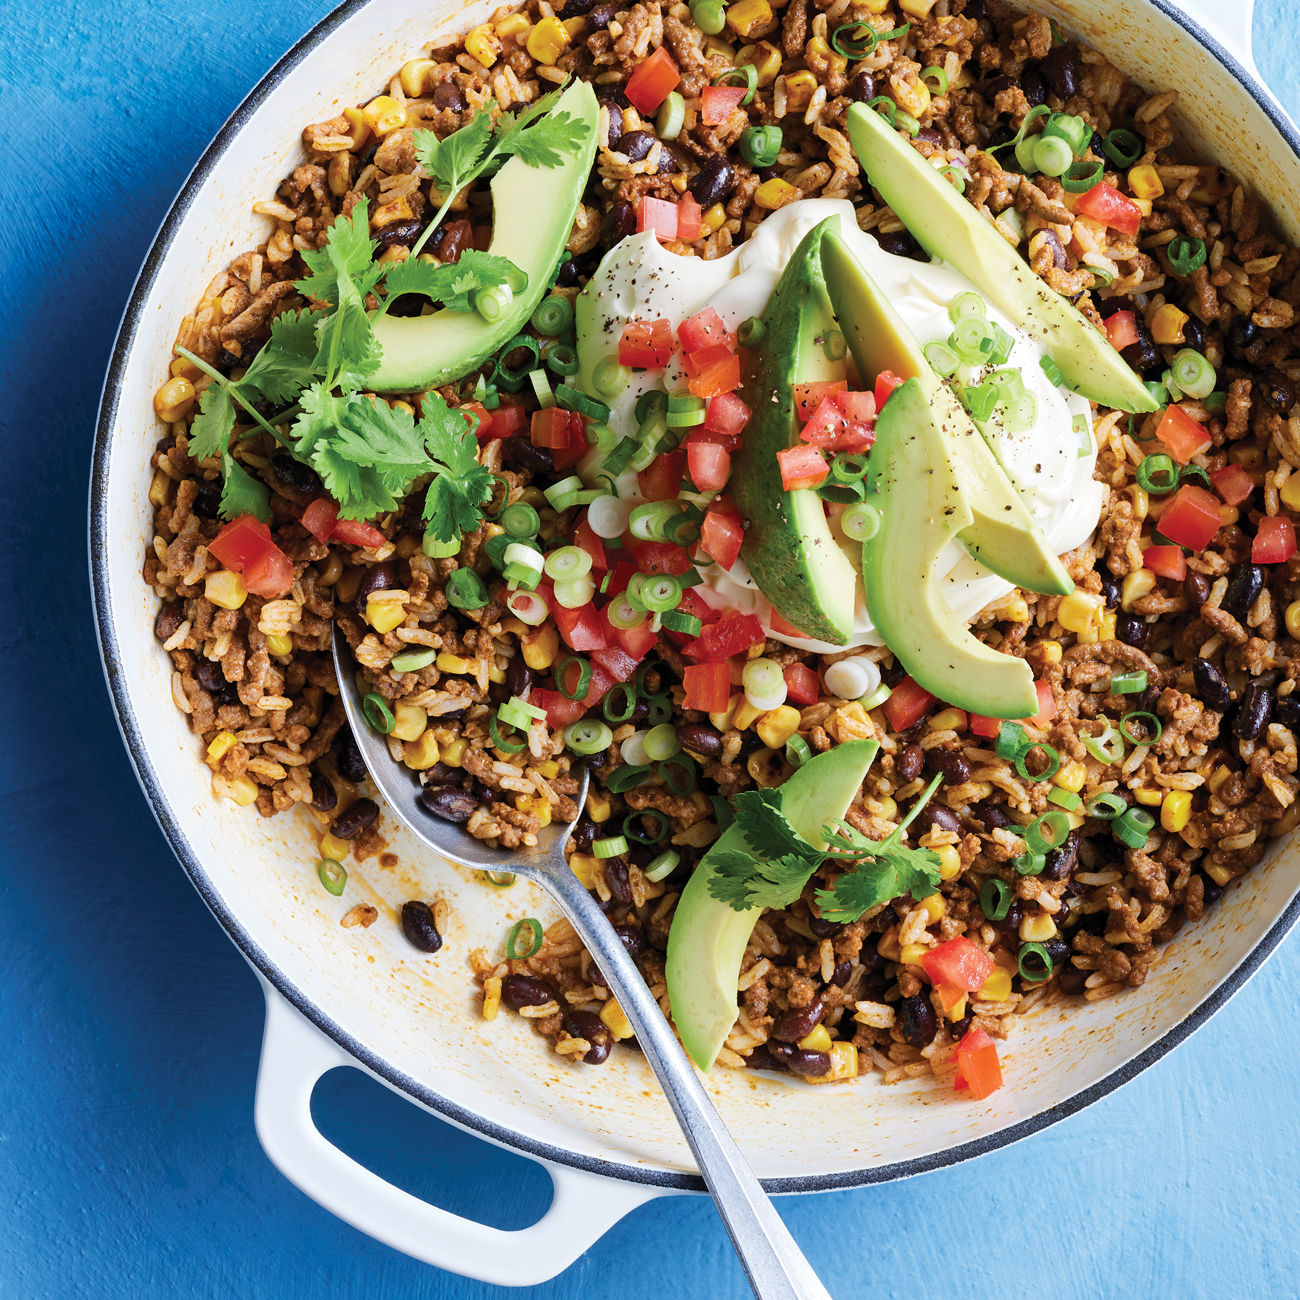 https://foodhub.scene7.com/is/image/woolworthsltdprod/2304-quick-one-pan-mexican-rice:Square-1300x1300